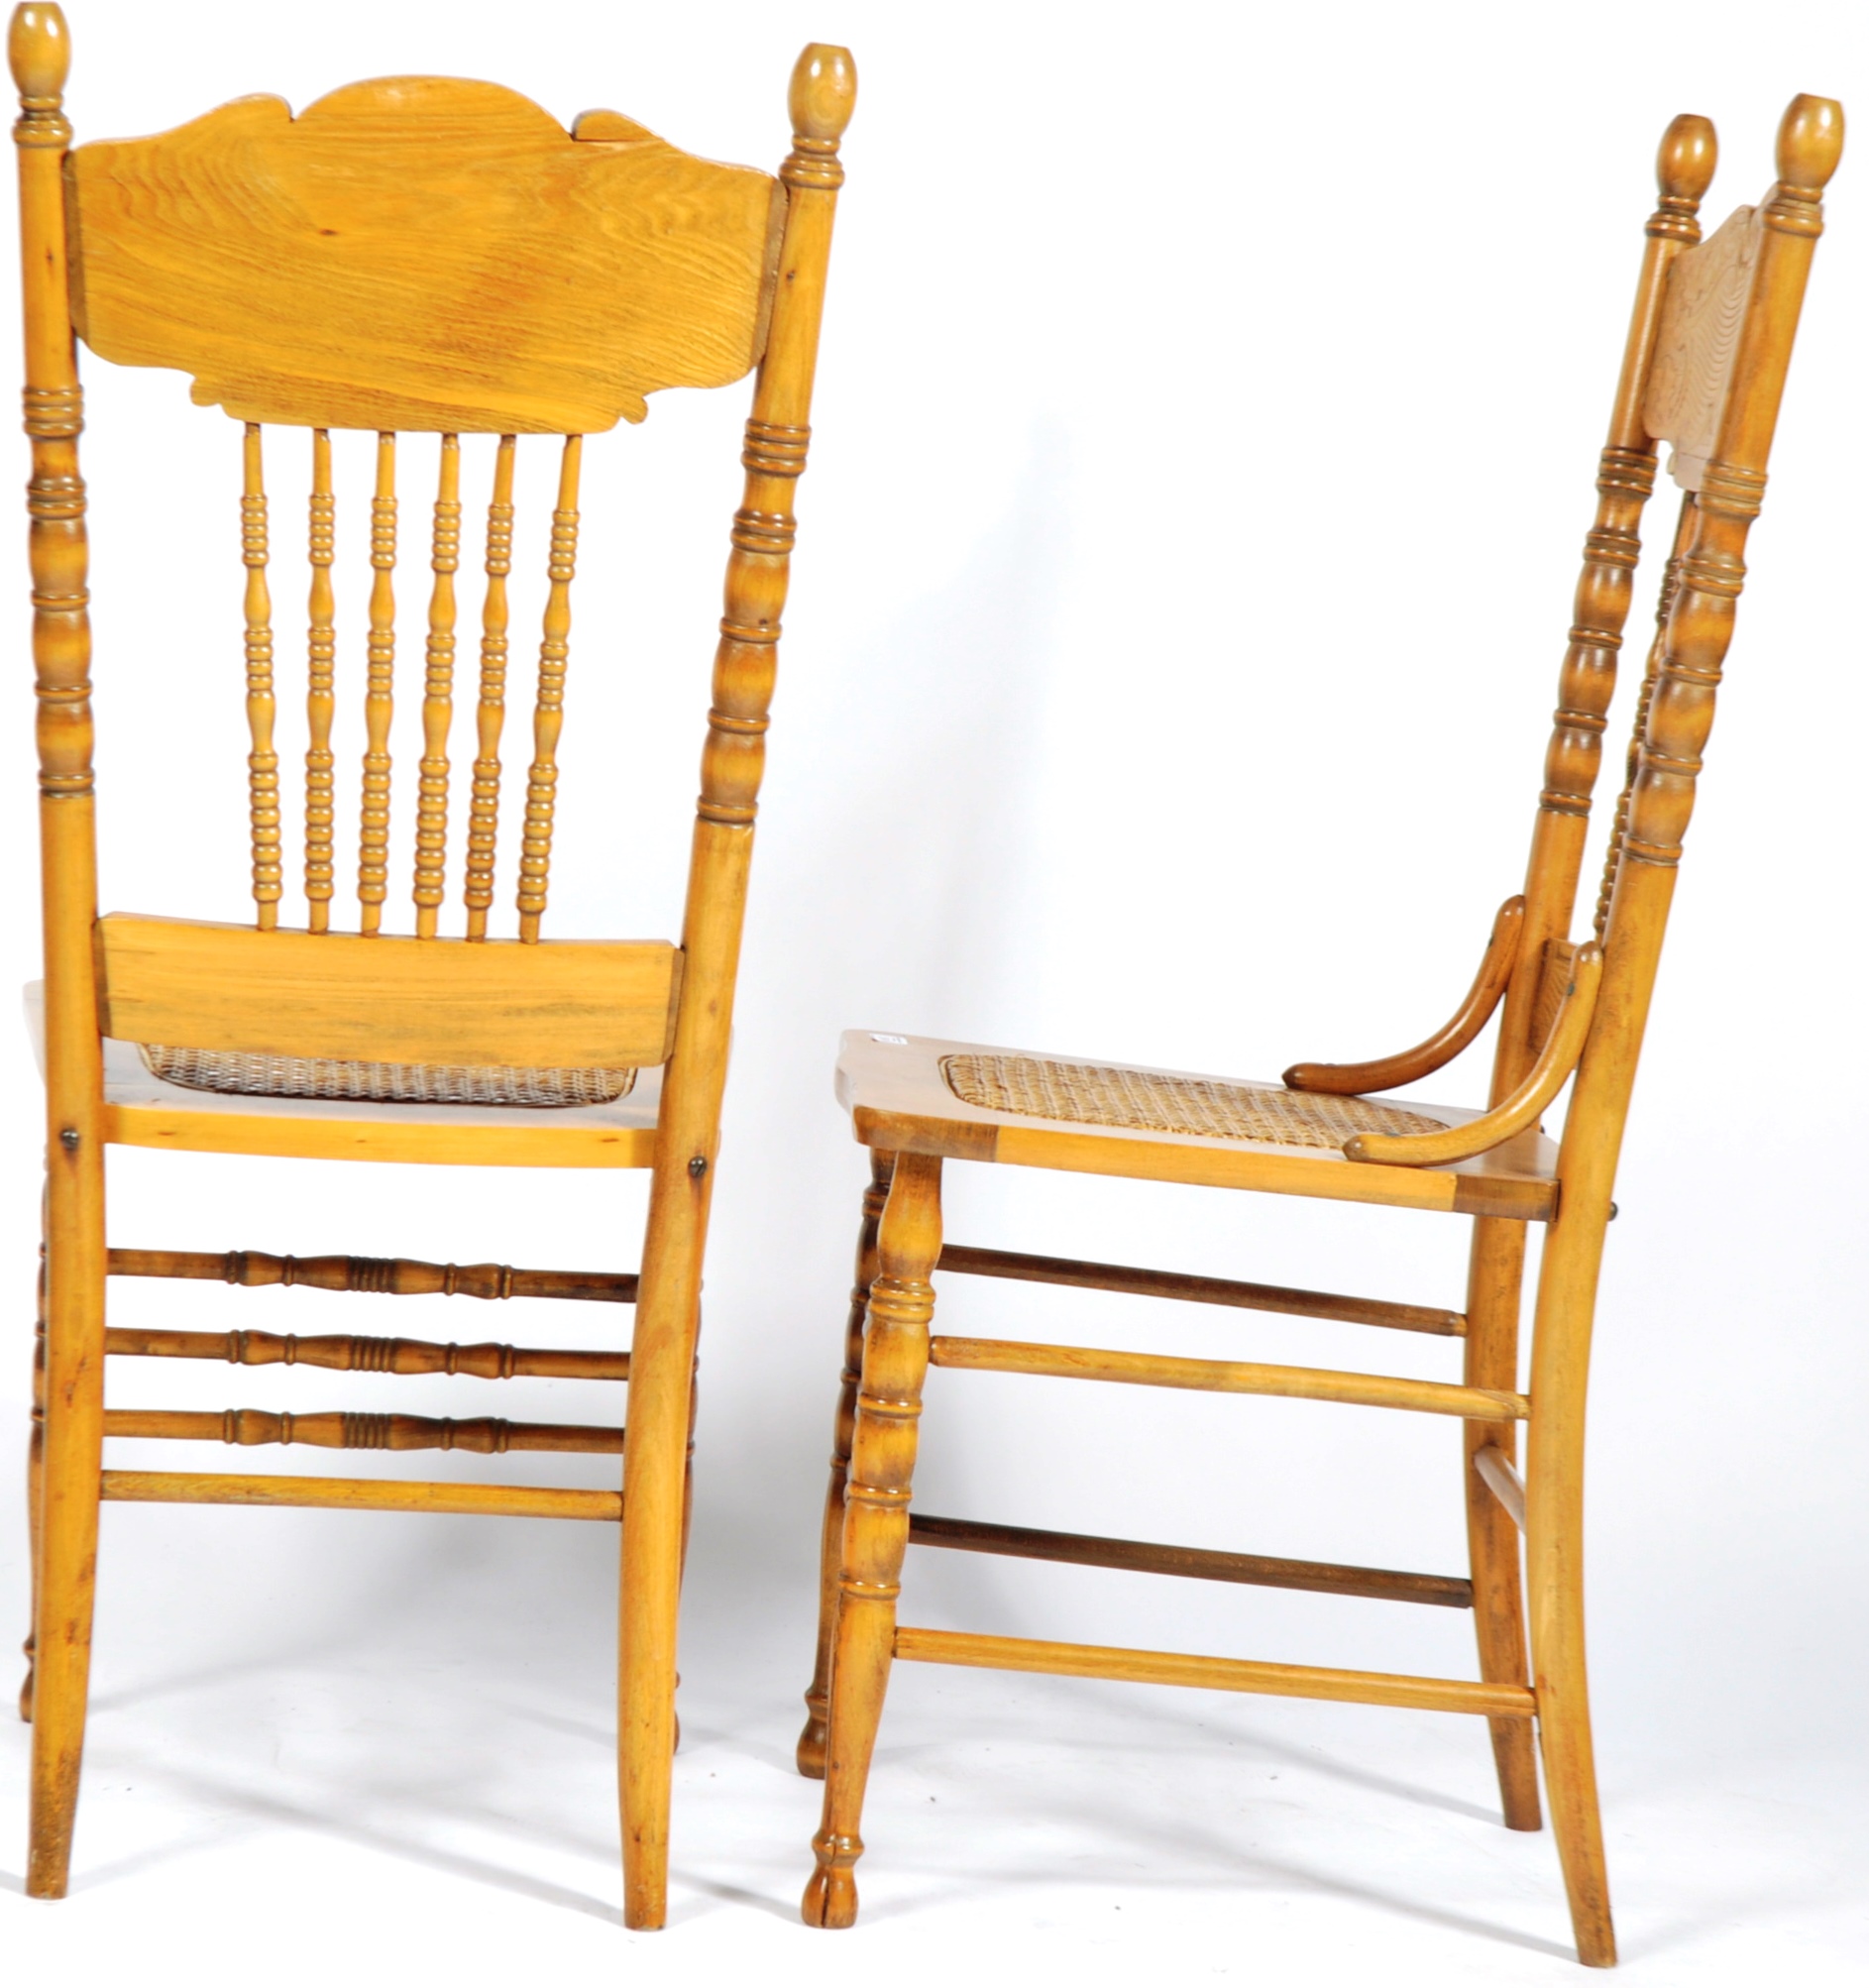 SET OF 12 EARLY 20TH CENTURY AMERICAN LARKIN PRESS BACK DINING CHAIRS - Image 8 of 8